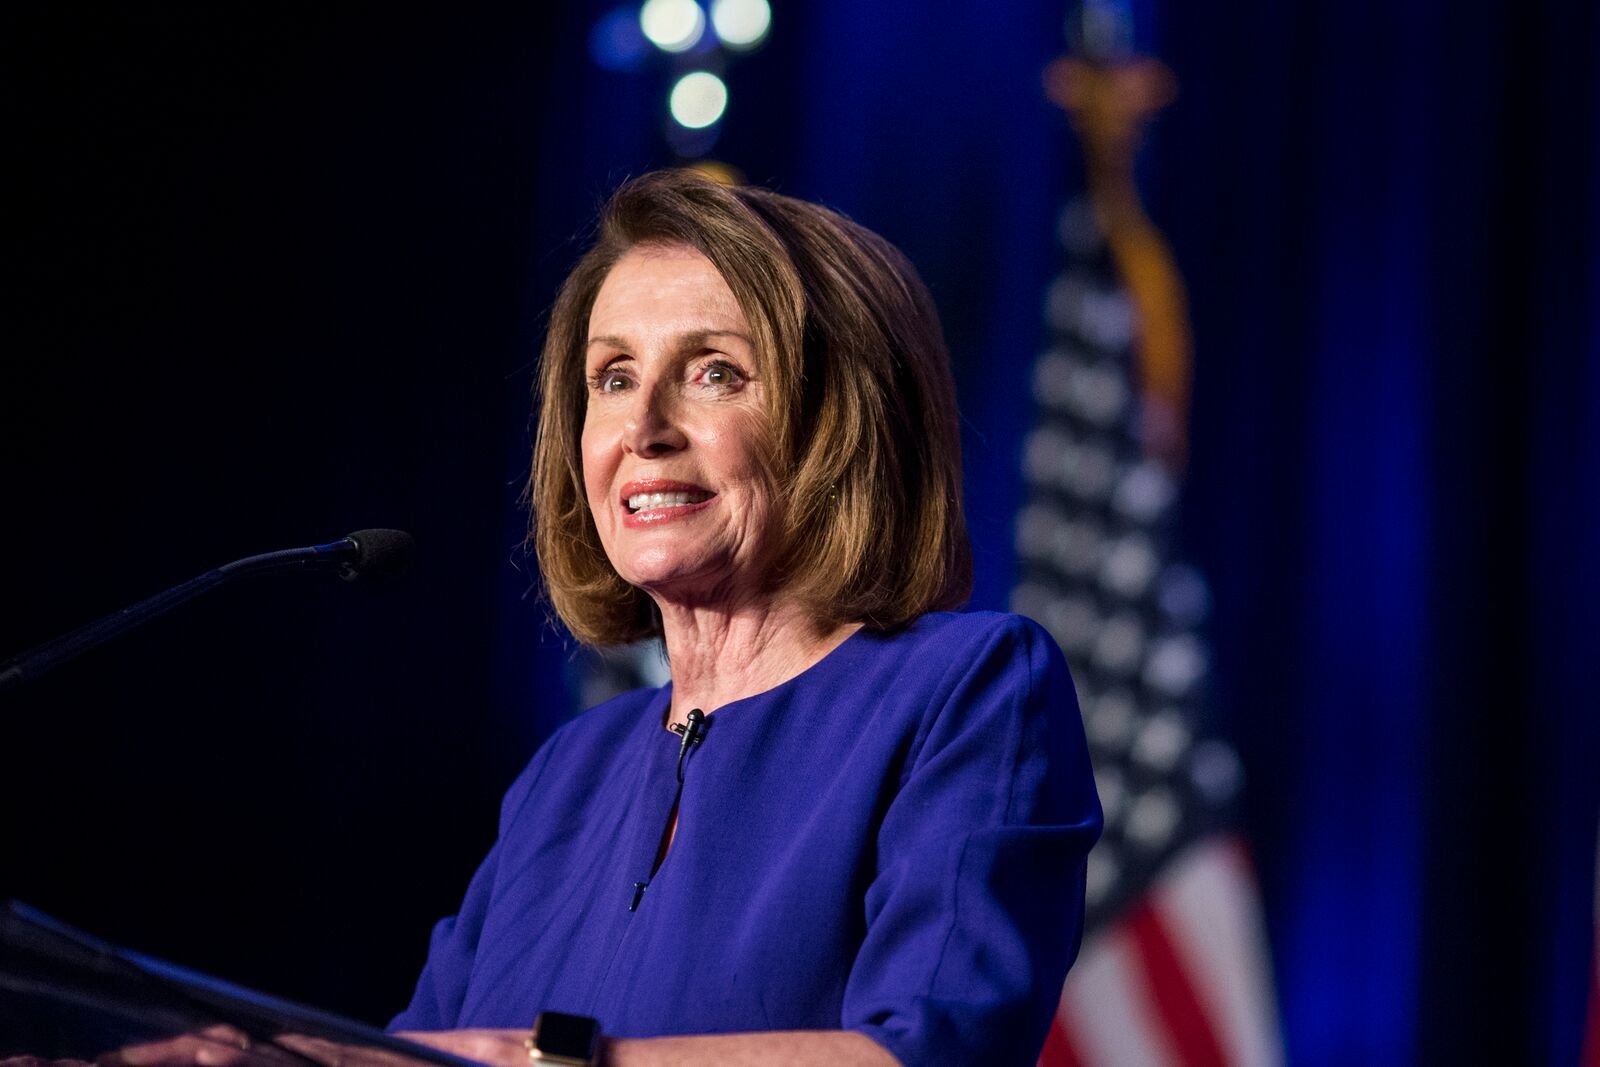  Nancy Pelosi speaks during a DCCC election watch party at the Hyatt Regency on November 6, 2018 in Washington, DC | Photo: Getty Images